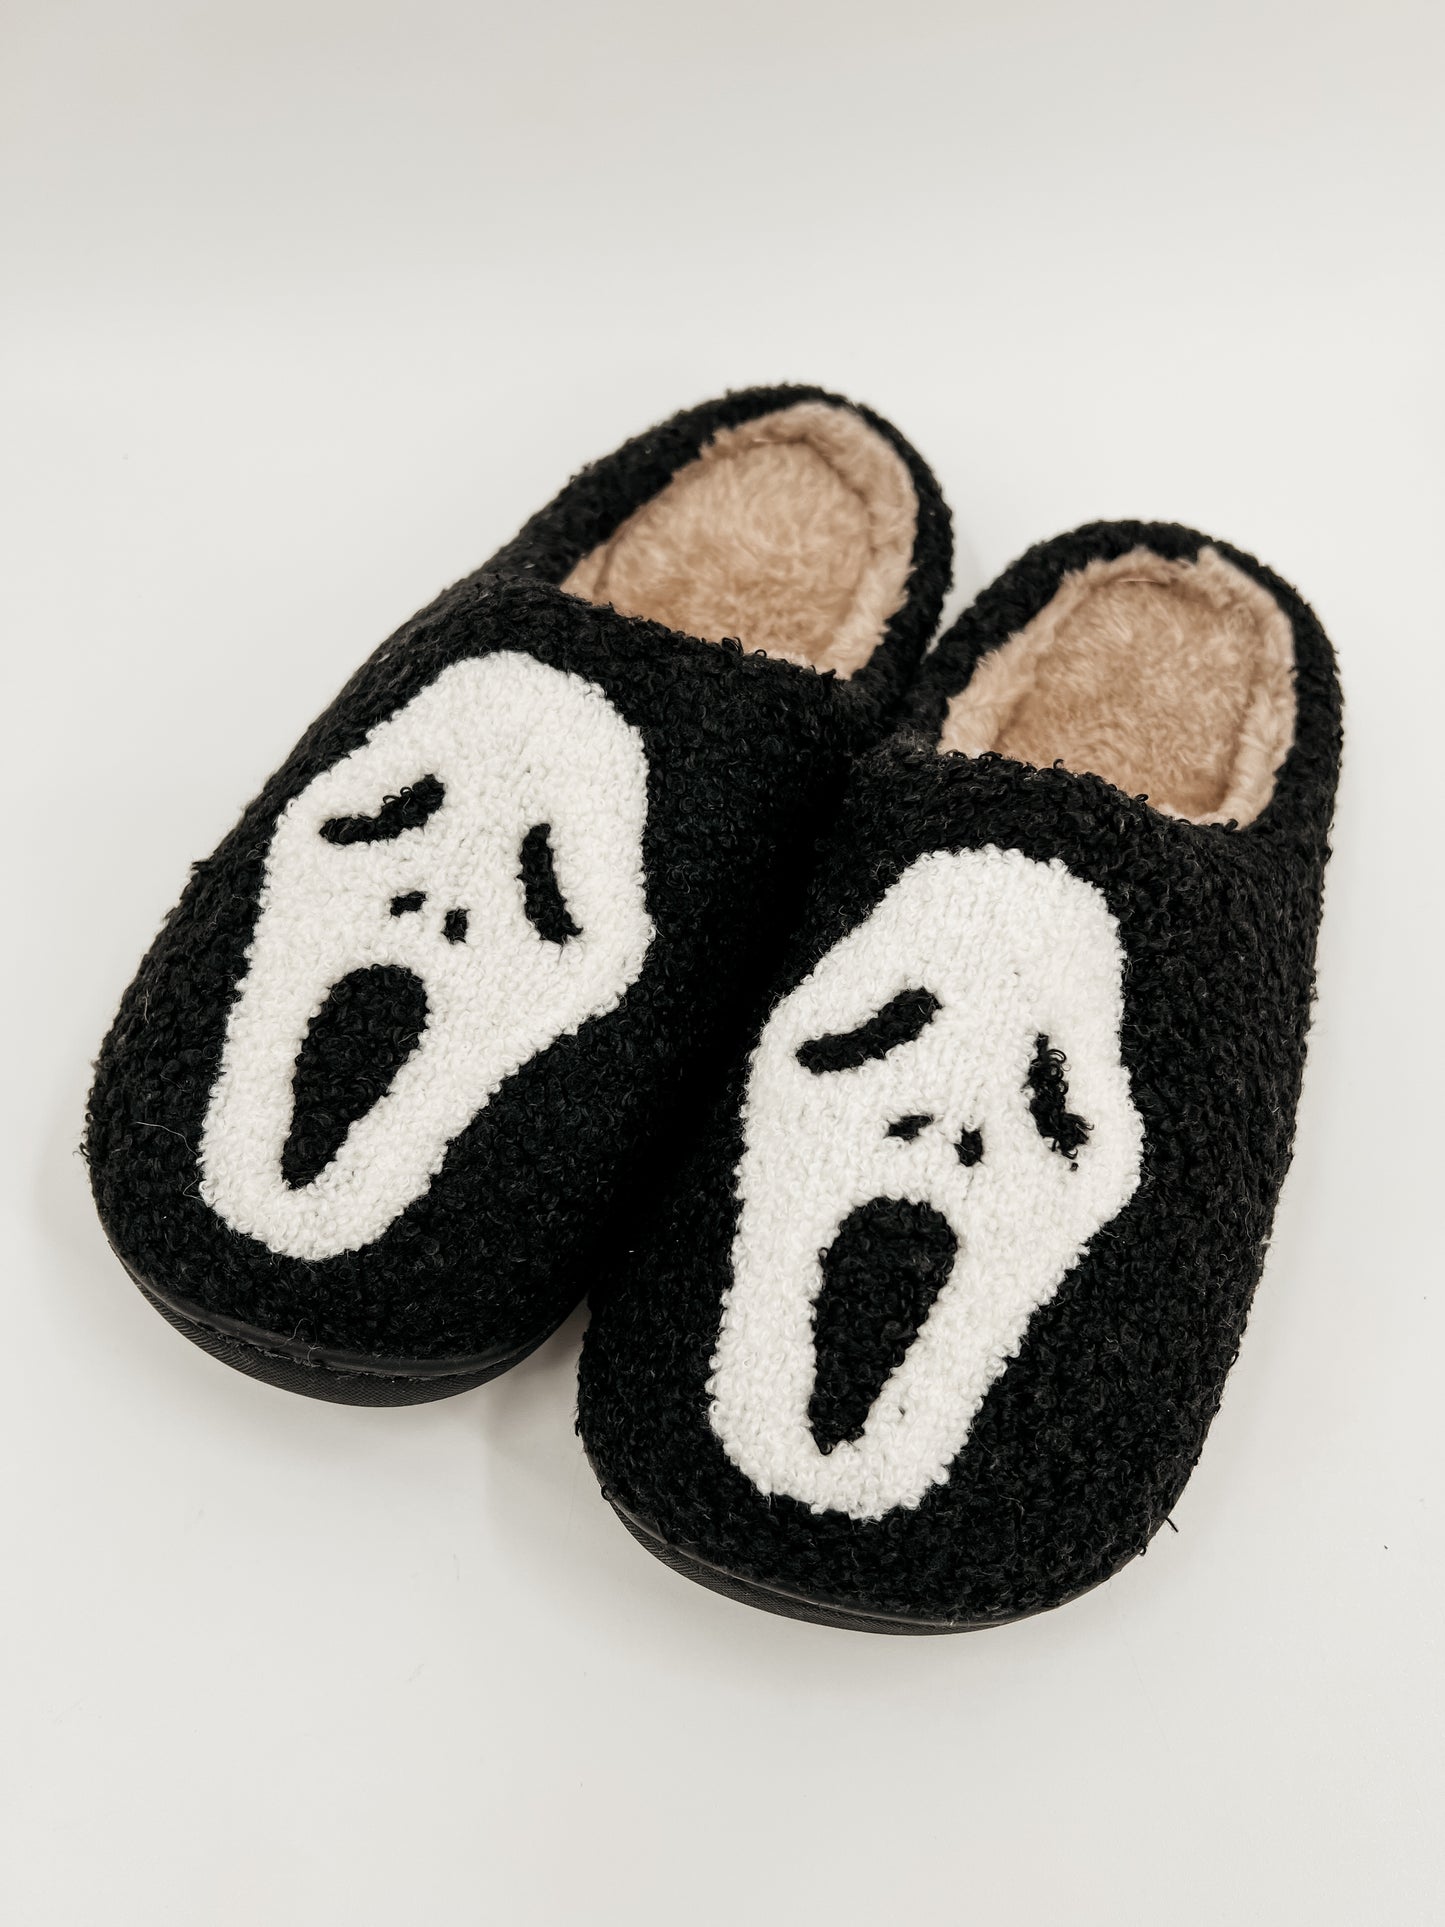 Ghost Face Slippers